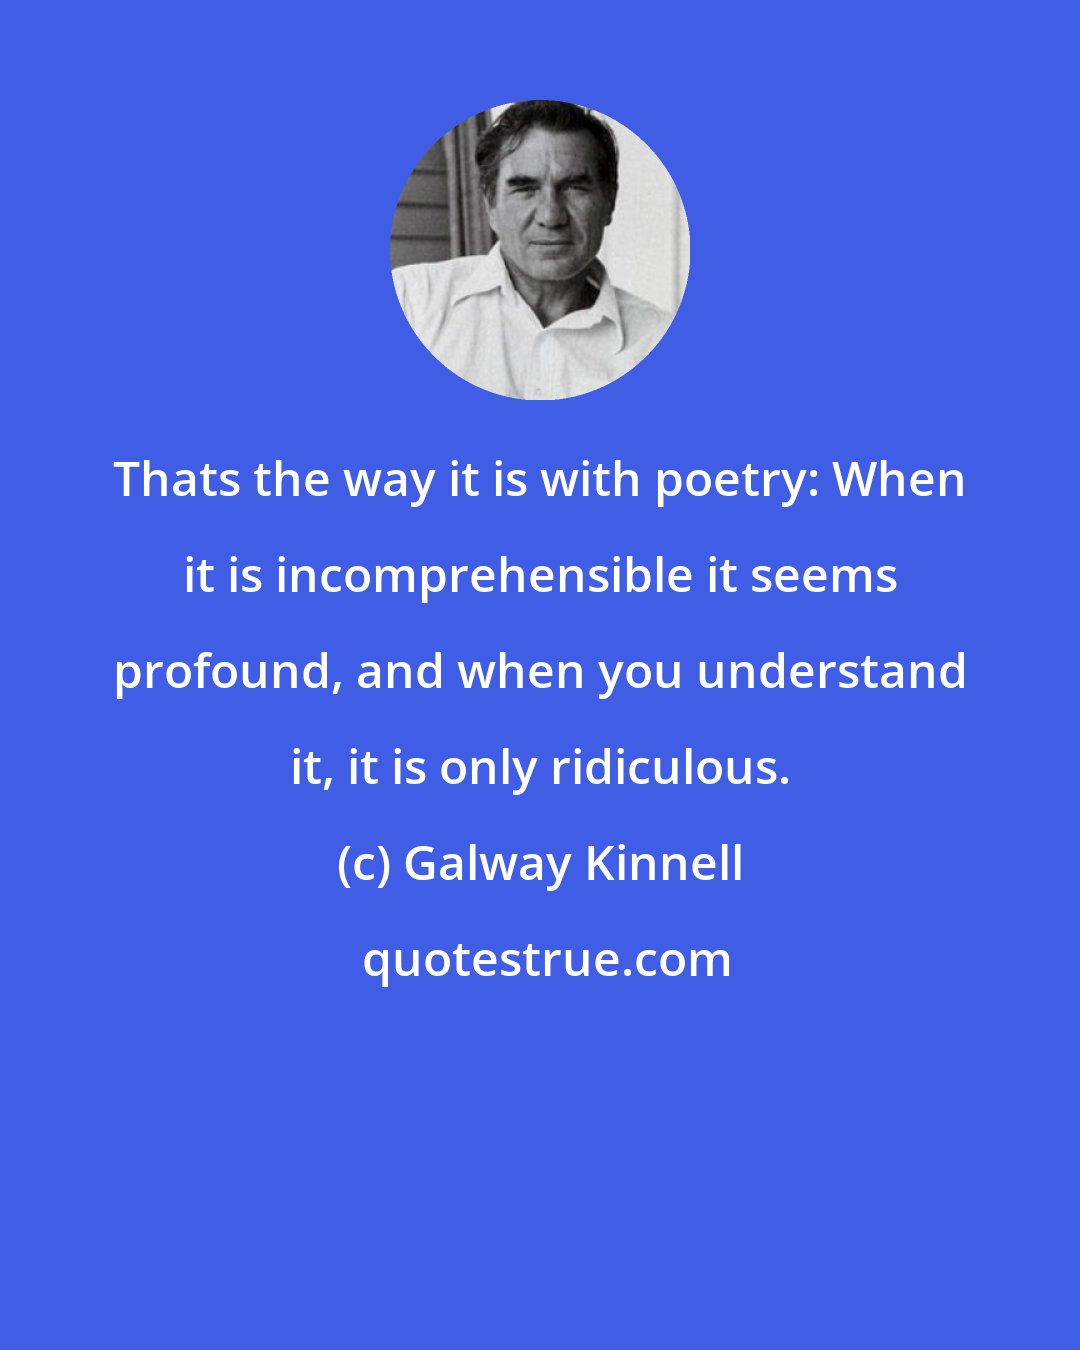 Galway Kinnell: Thats the way it is with poetry: When it is incomprehensible it seems profound, and when you understand it, it is only ridiculous.